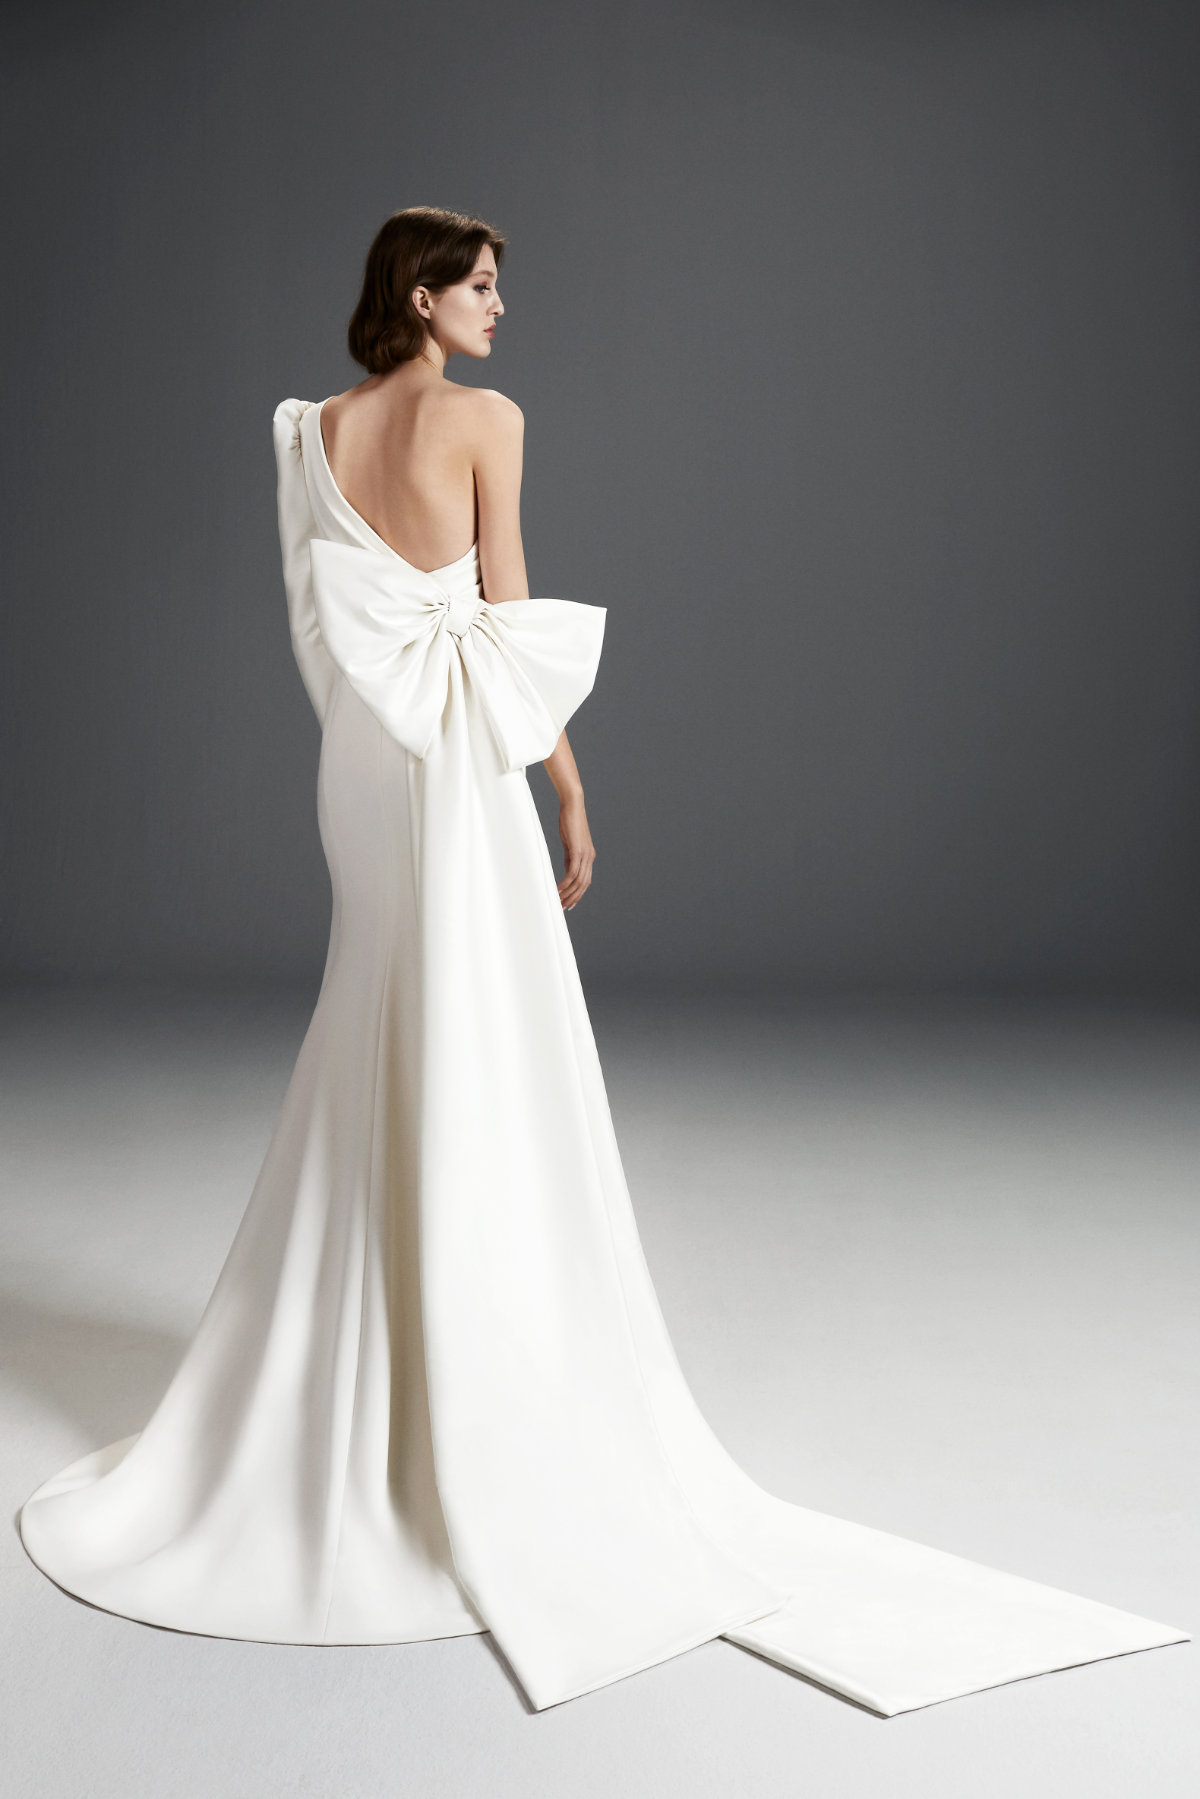 Viktor&Rolf Present Their New Mariage Spring/Summer 2024 Collection